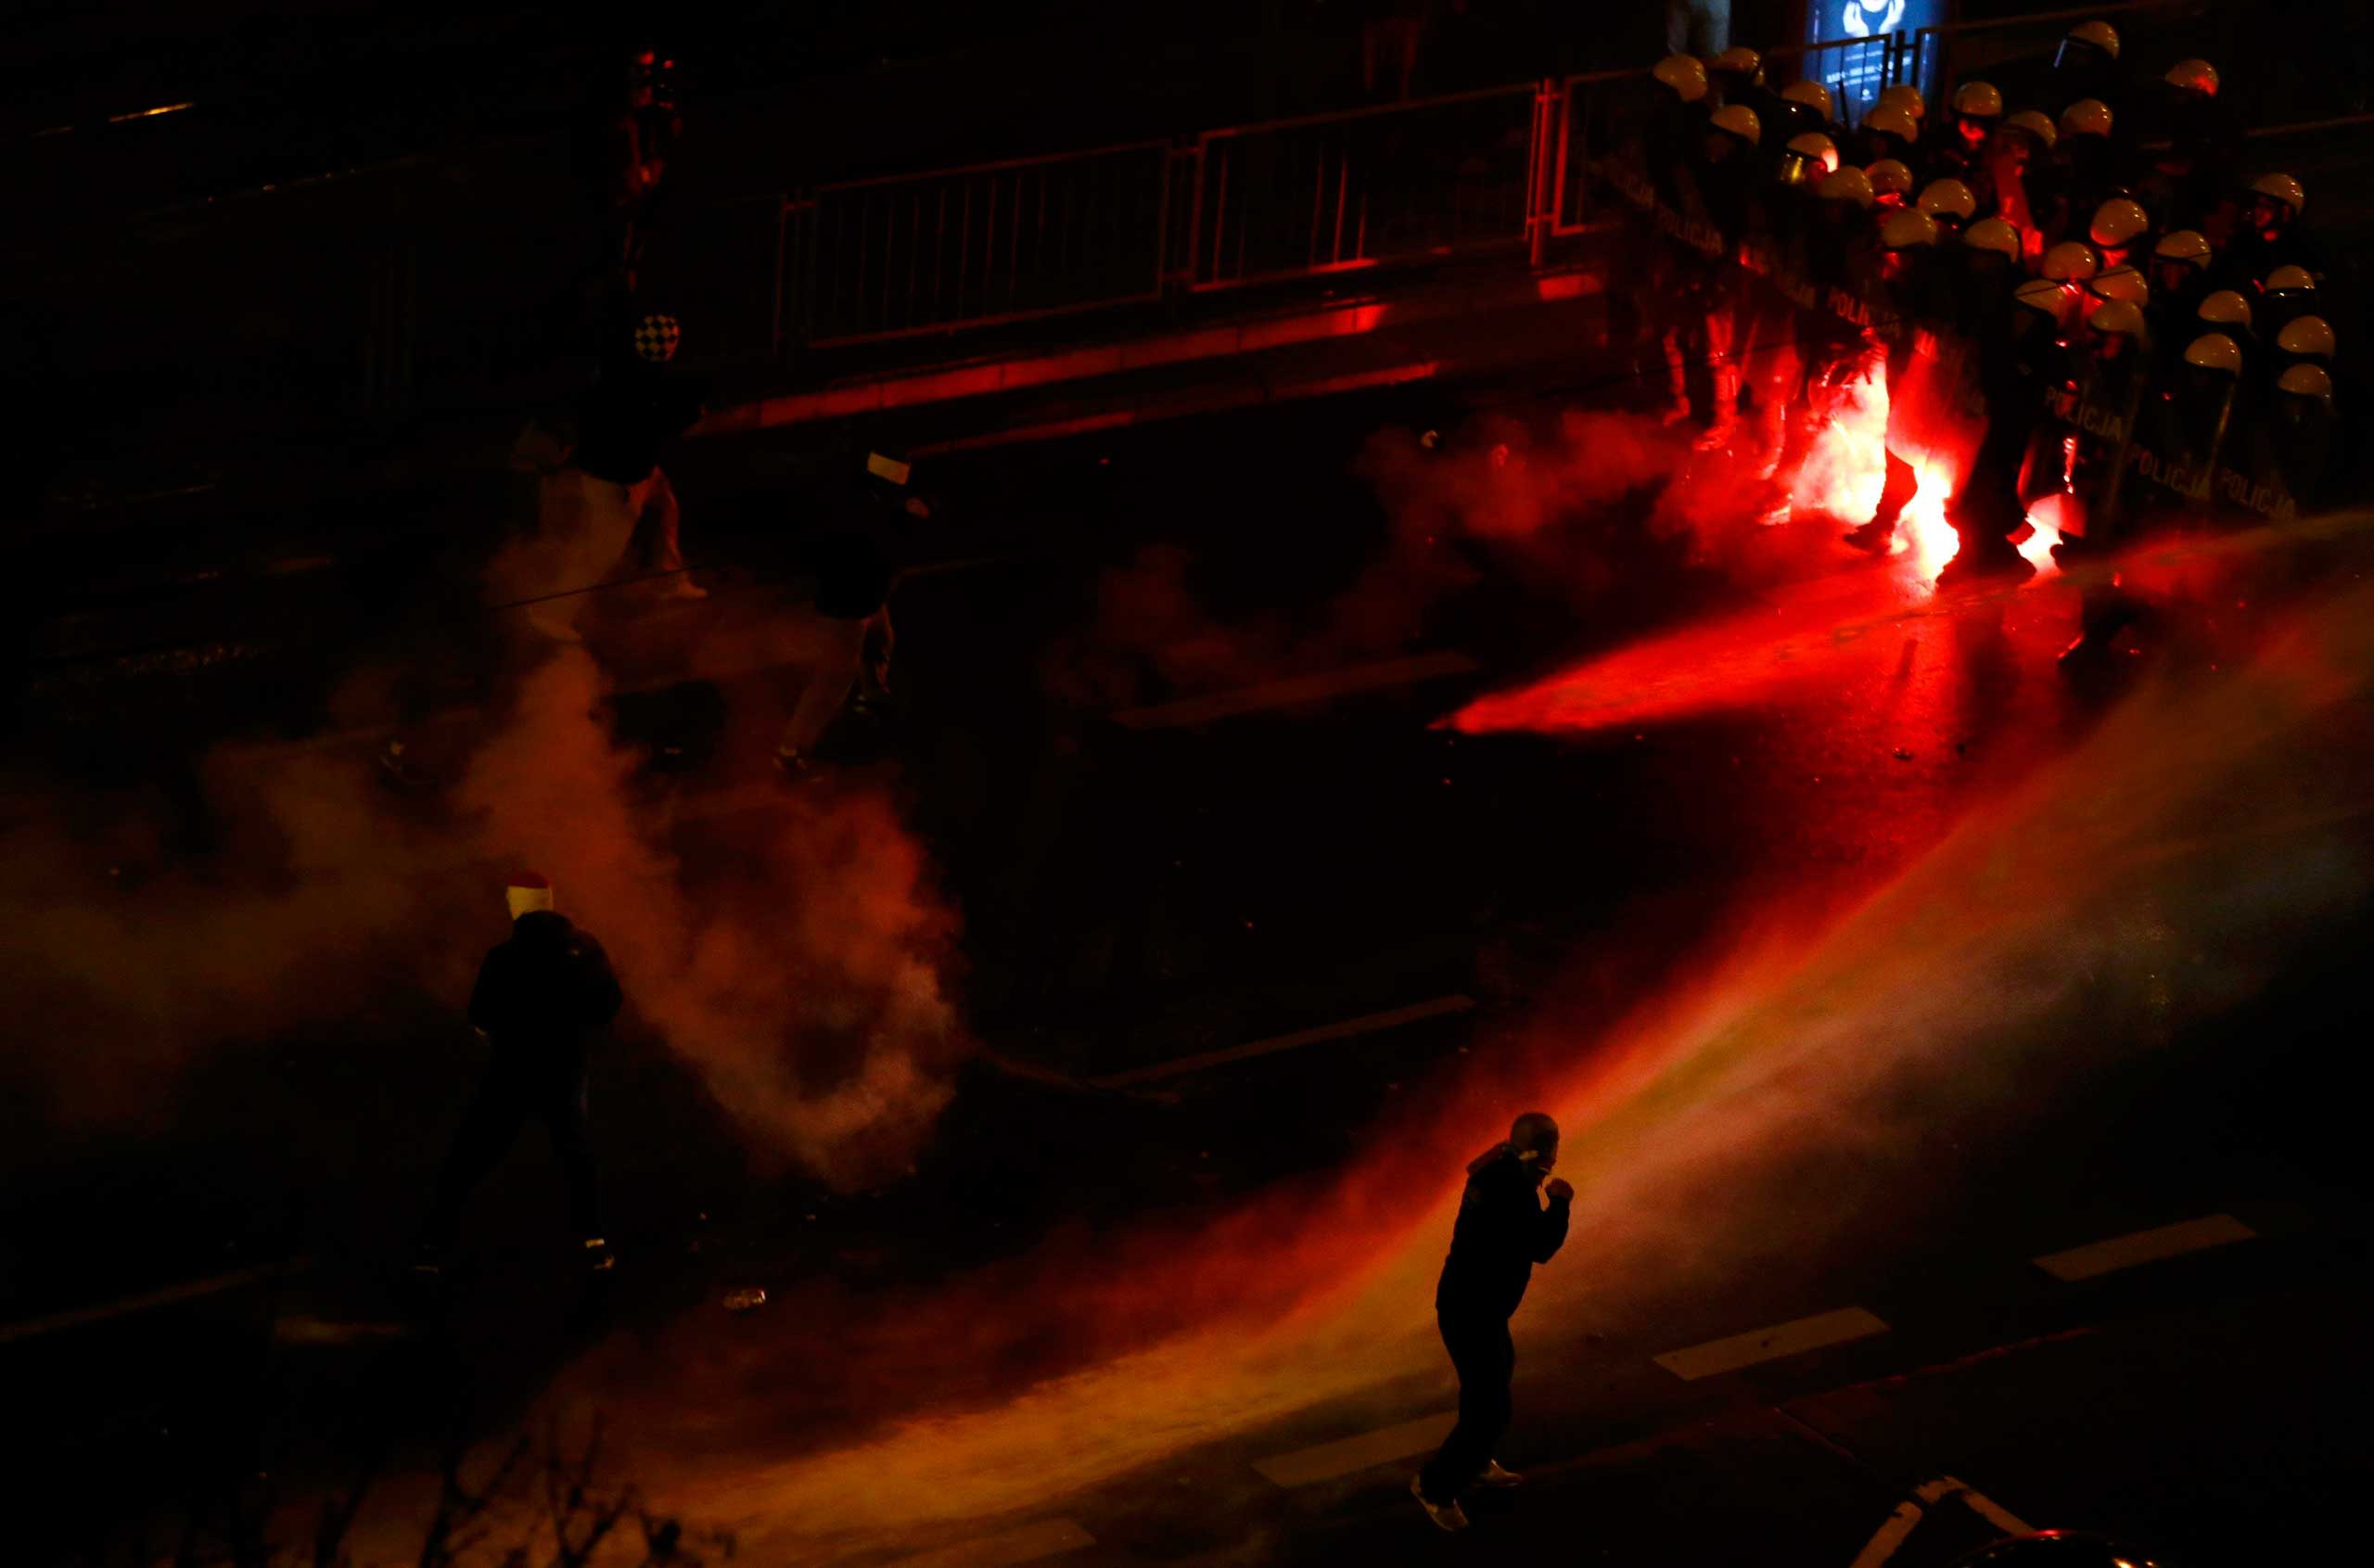 Nov. 11, 2014. Police use water cannon to push back several hundred masked men who broke away from a far-right march and threw stones and flares at lines of riot police in Warsaw.  Nationalist groups march through Warsaw each year to mark the anniversary of Polish independence, but for the fourth year in a row the procession turned violent.